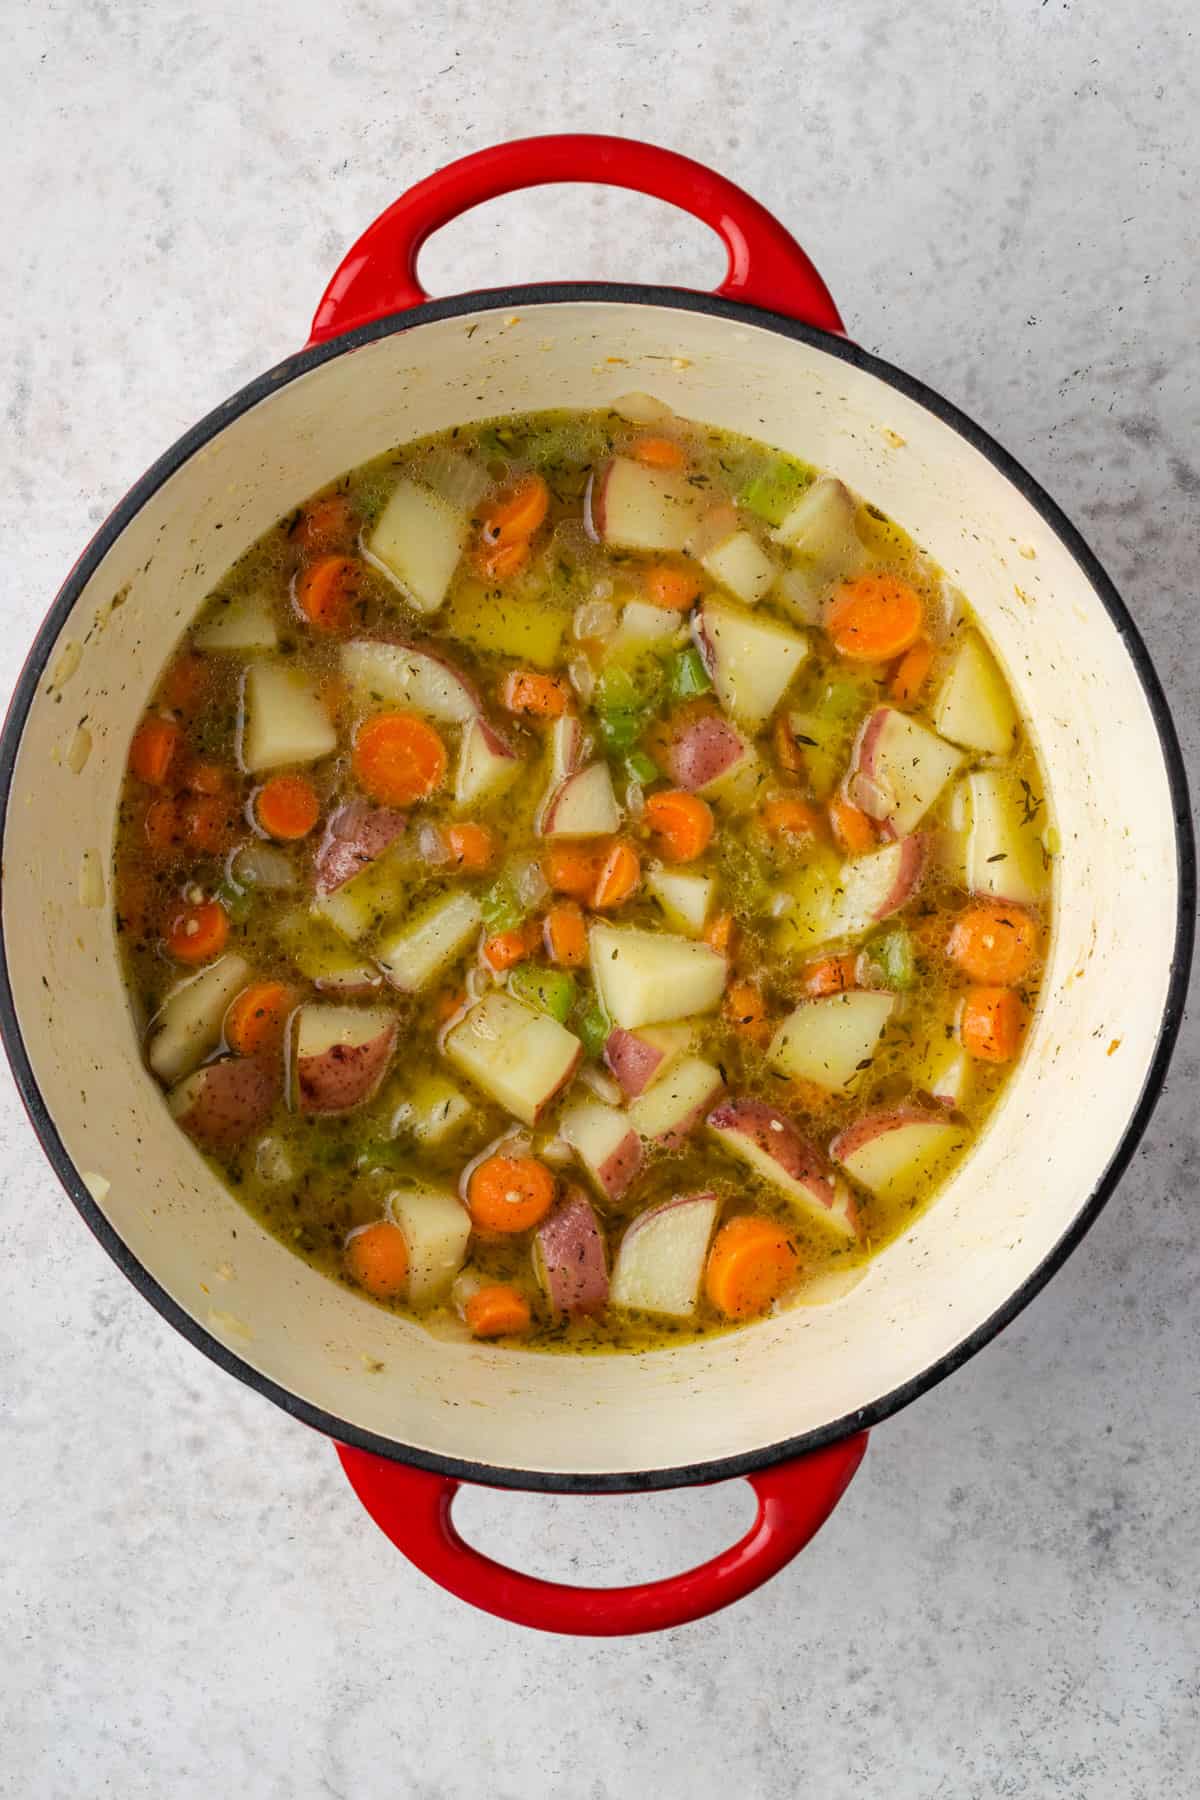 A large pot with partially cooked vegetables and chicken broth.